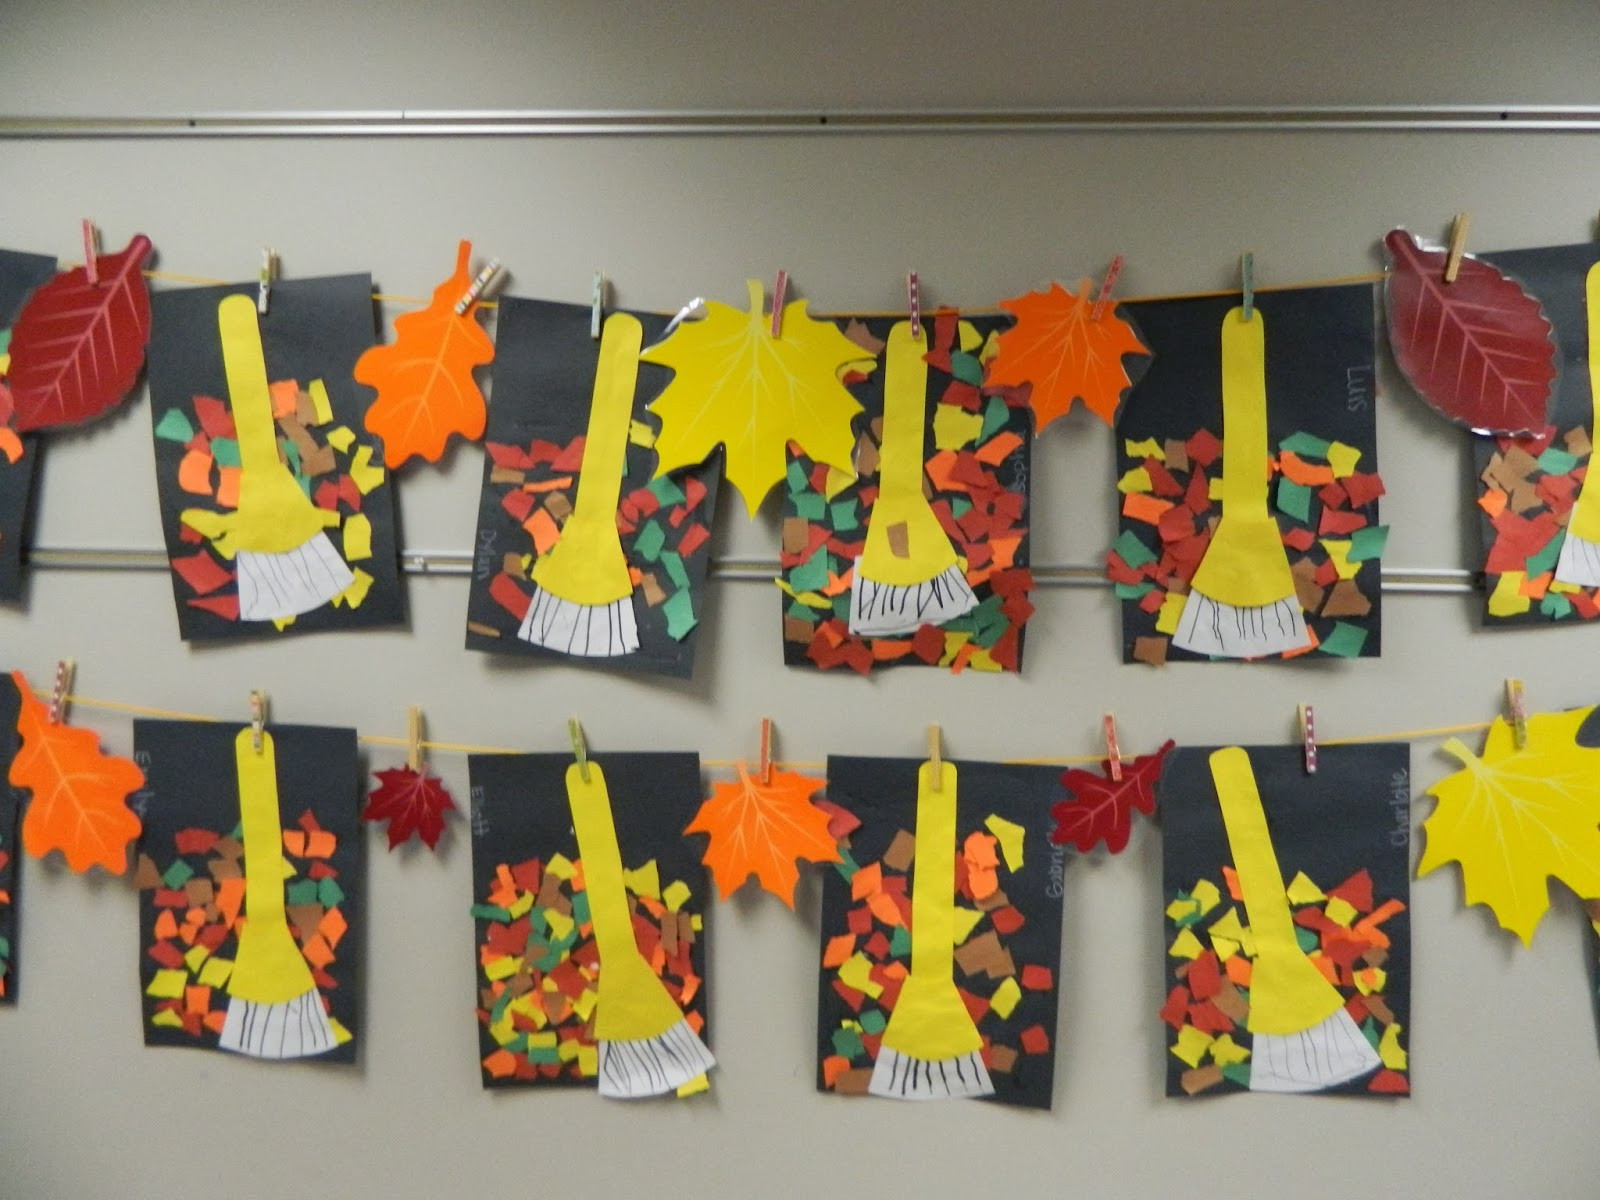 Preschoolers Arts And Crafts Ideas
 the vintage umbrella rakes and leaves art project